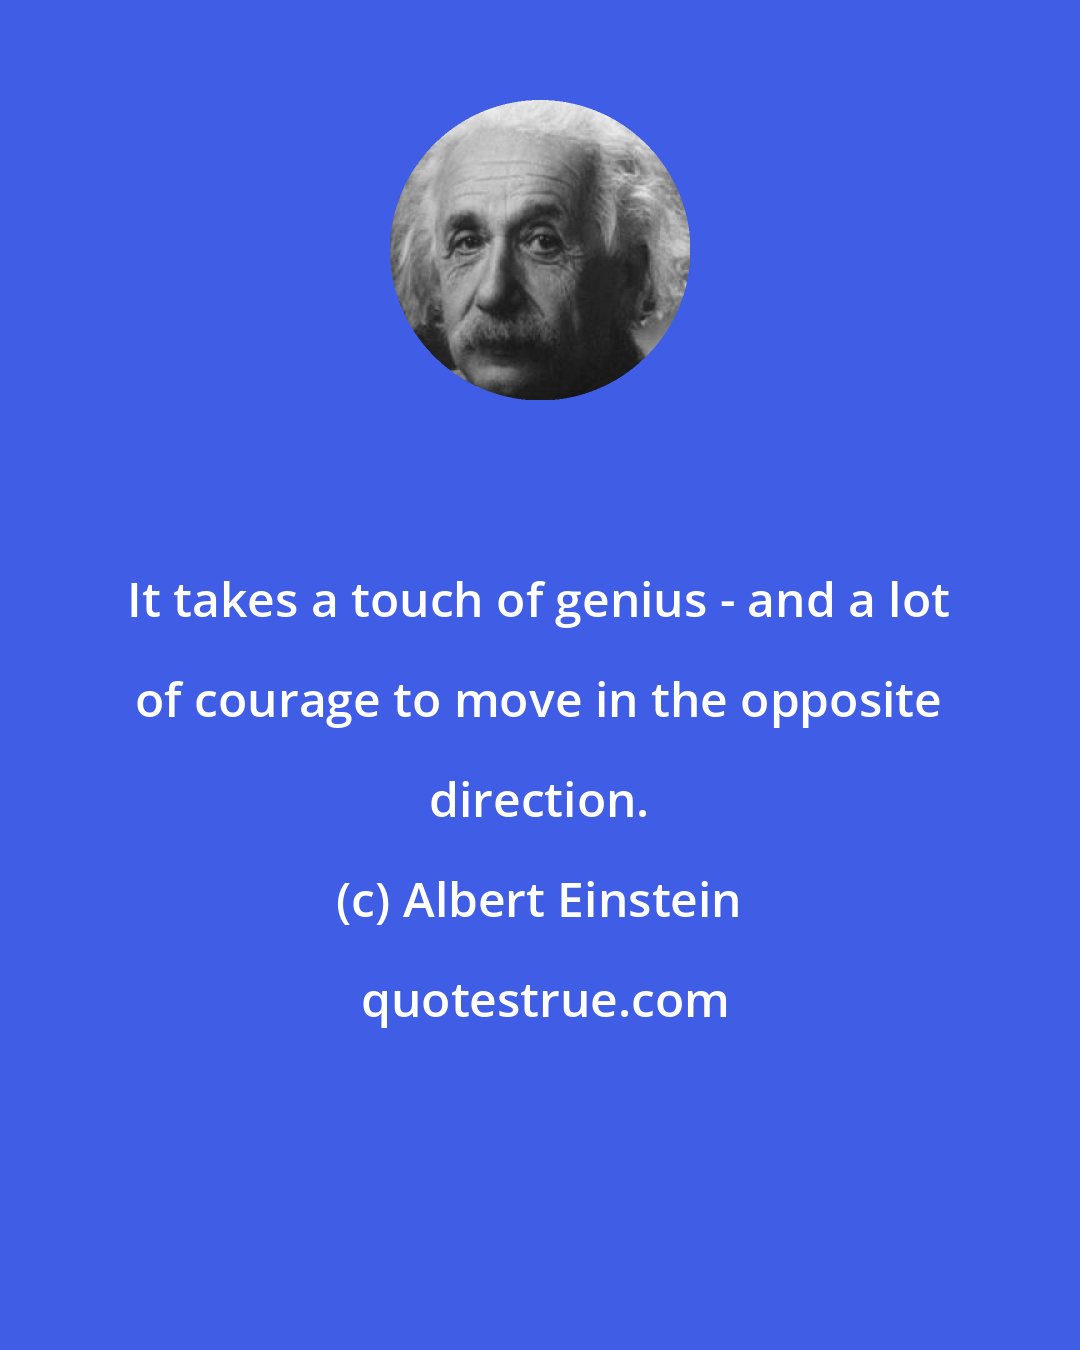 Albert Einstein: It takes a touch of genius - and a lot of courage to move in the opposite direction.